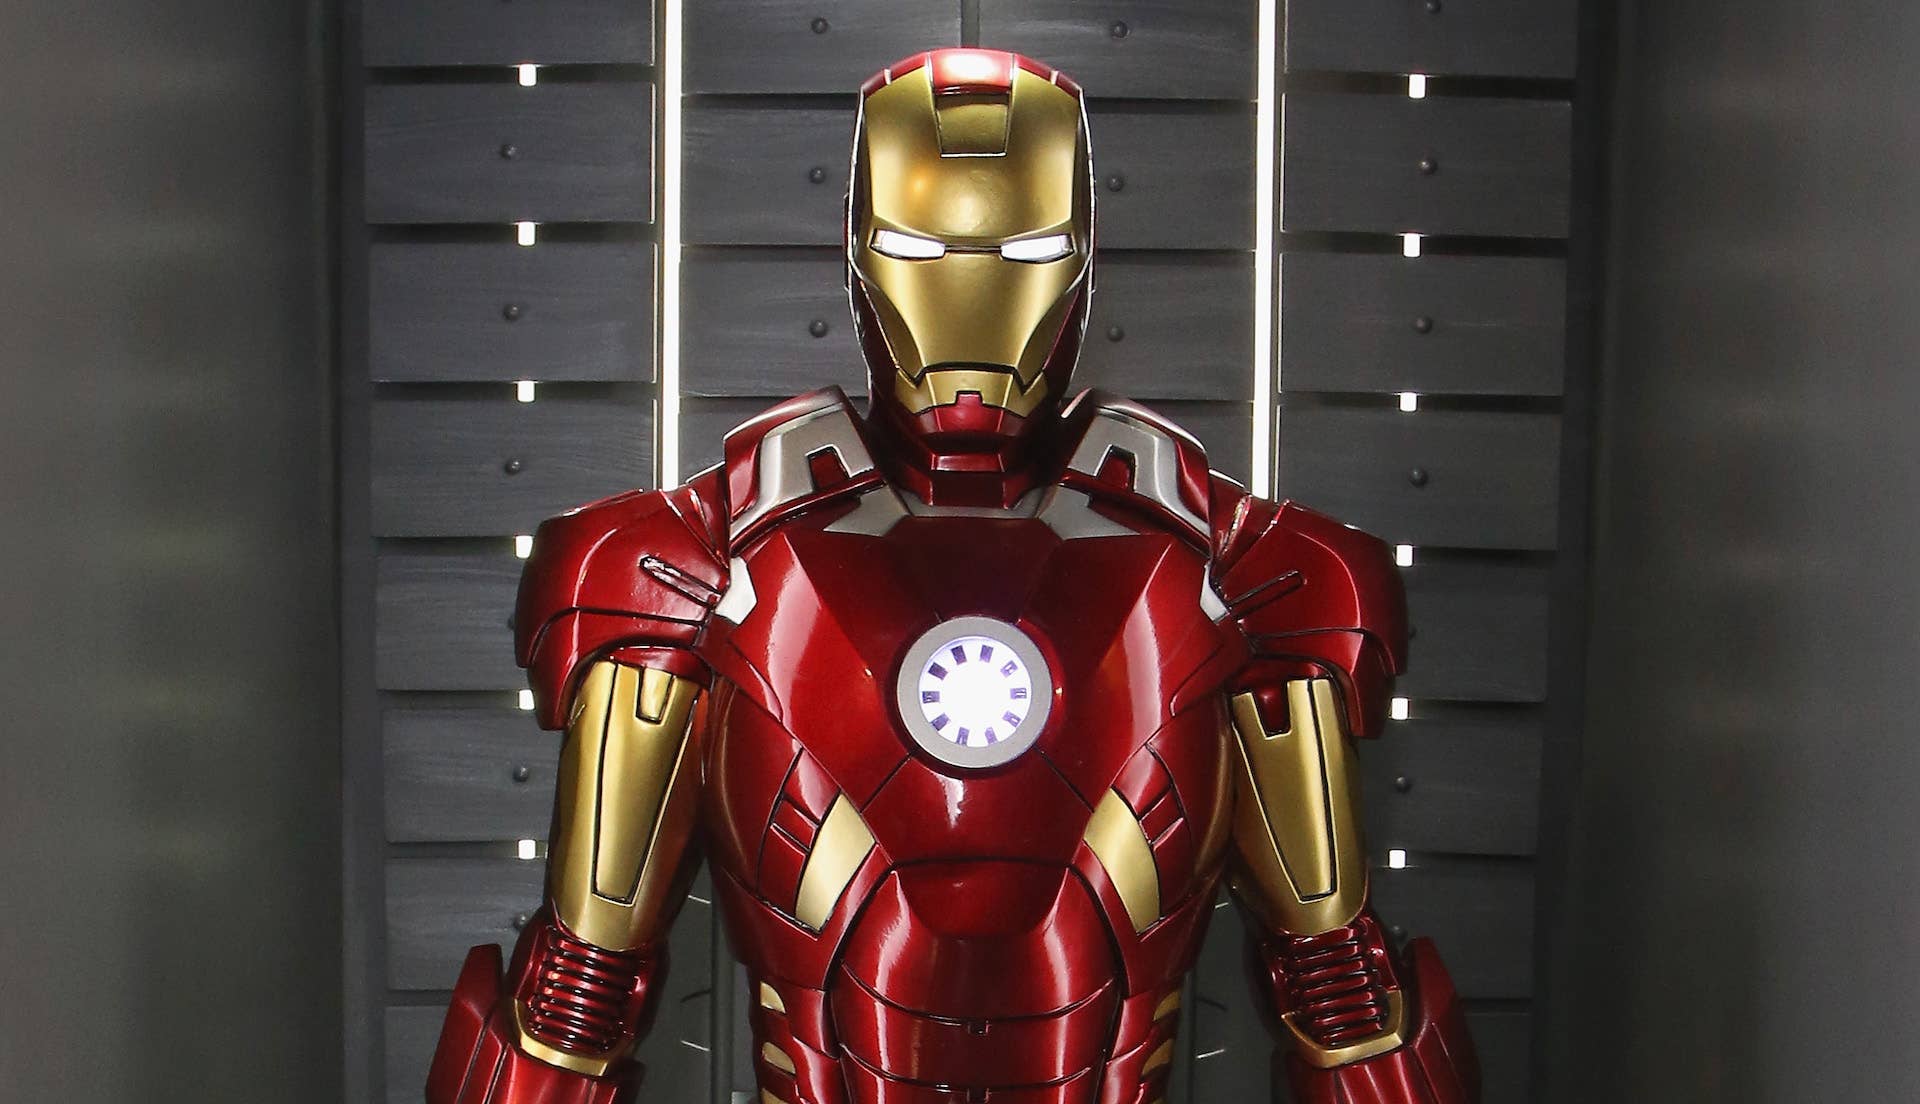 Iron Man armor from a museum